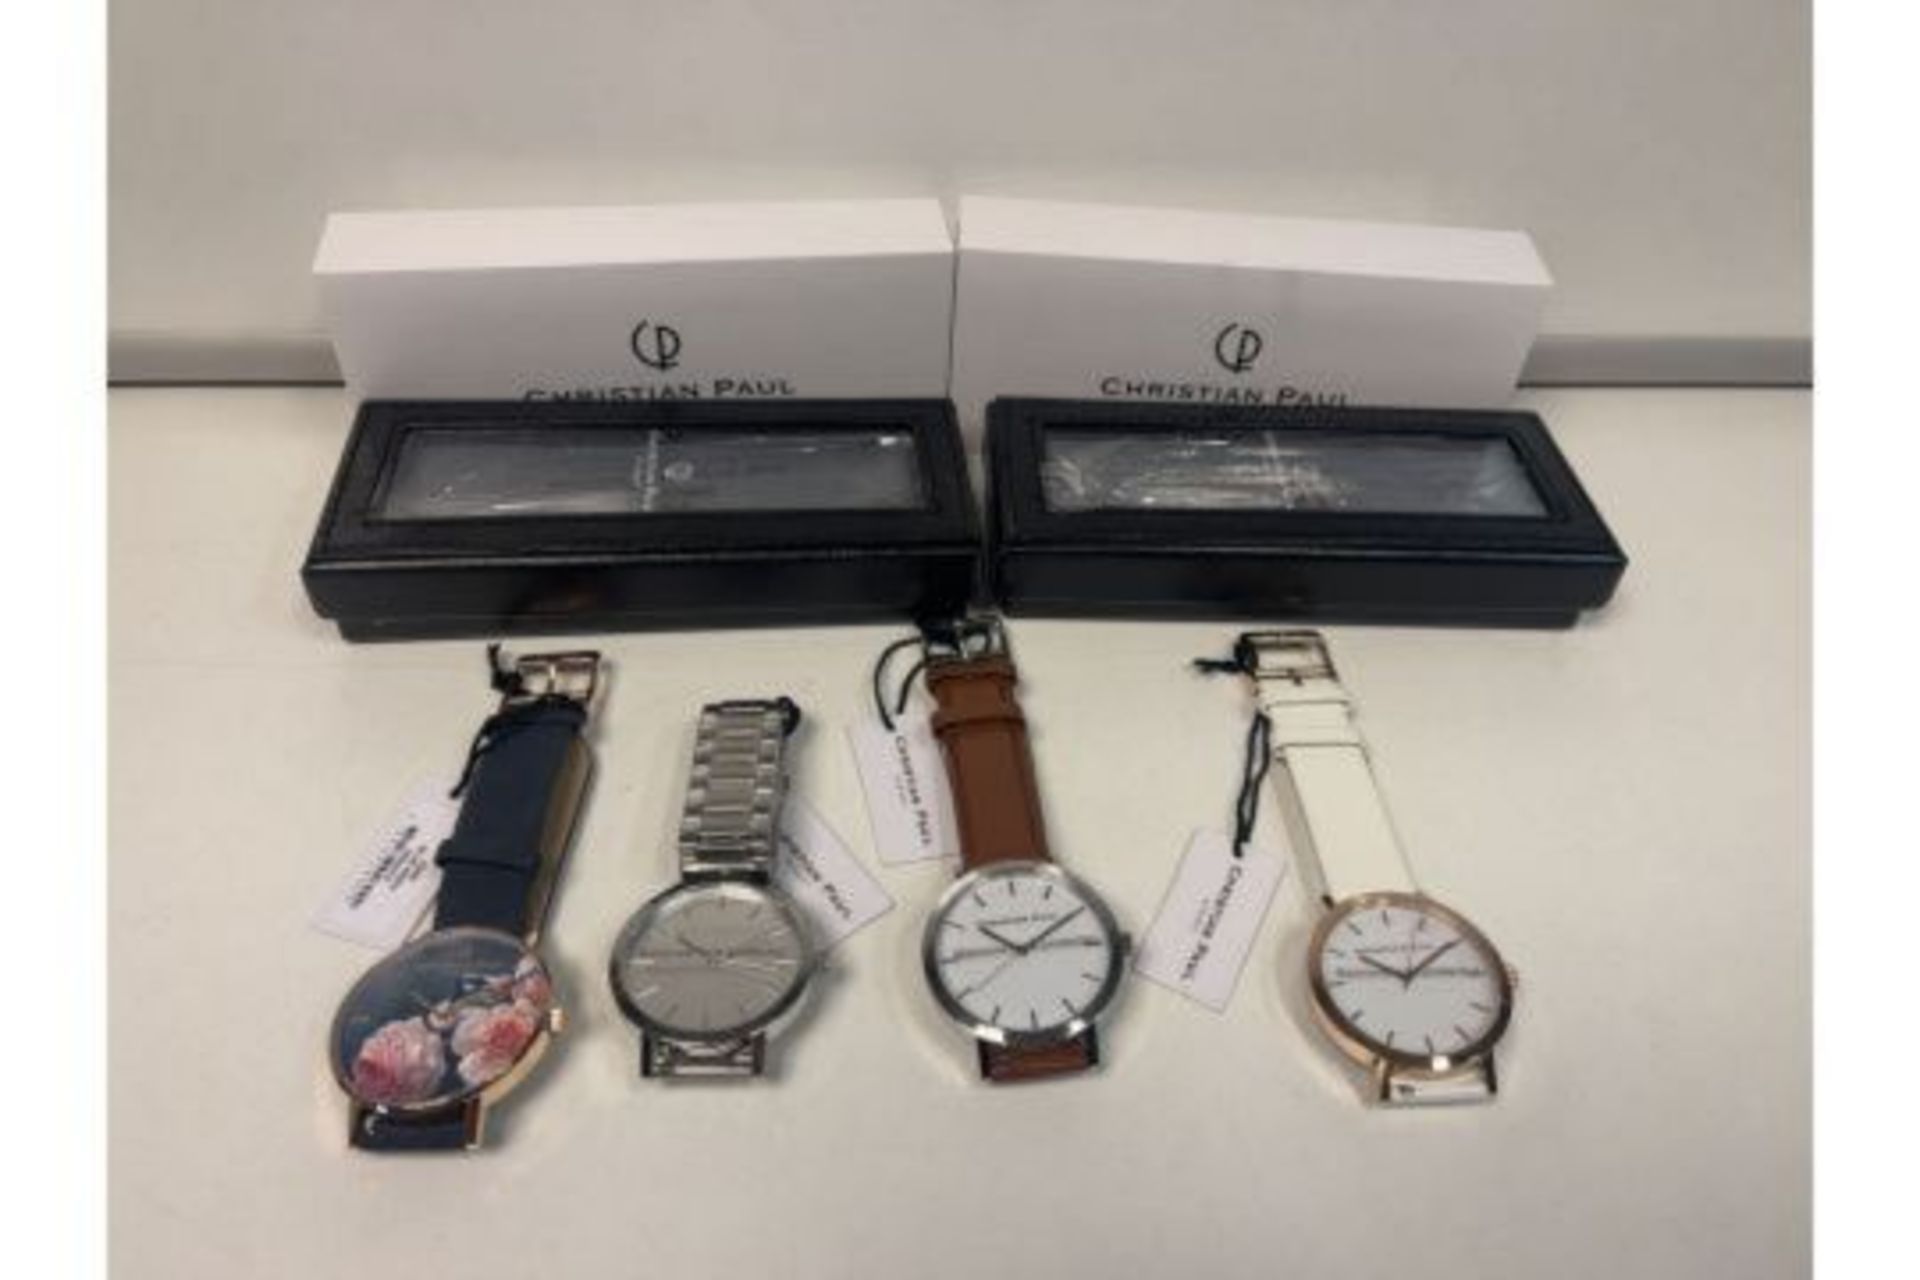 4 X BRAND NEW CHRISTIAN PAUL LUXURY WATCHES IN VARIOUS DESIGNS RRP £99-129 EACH OFF